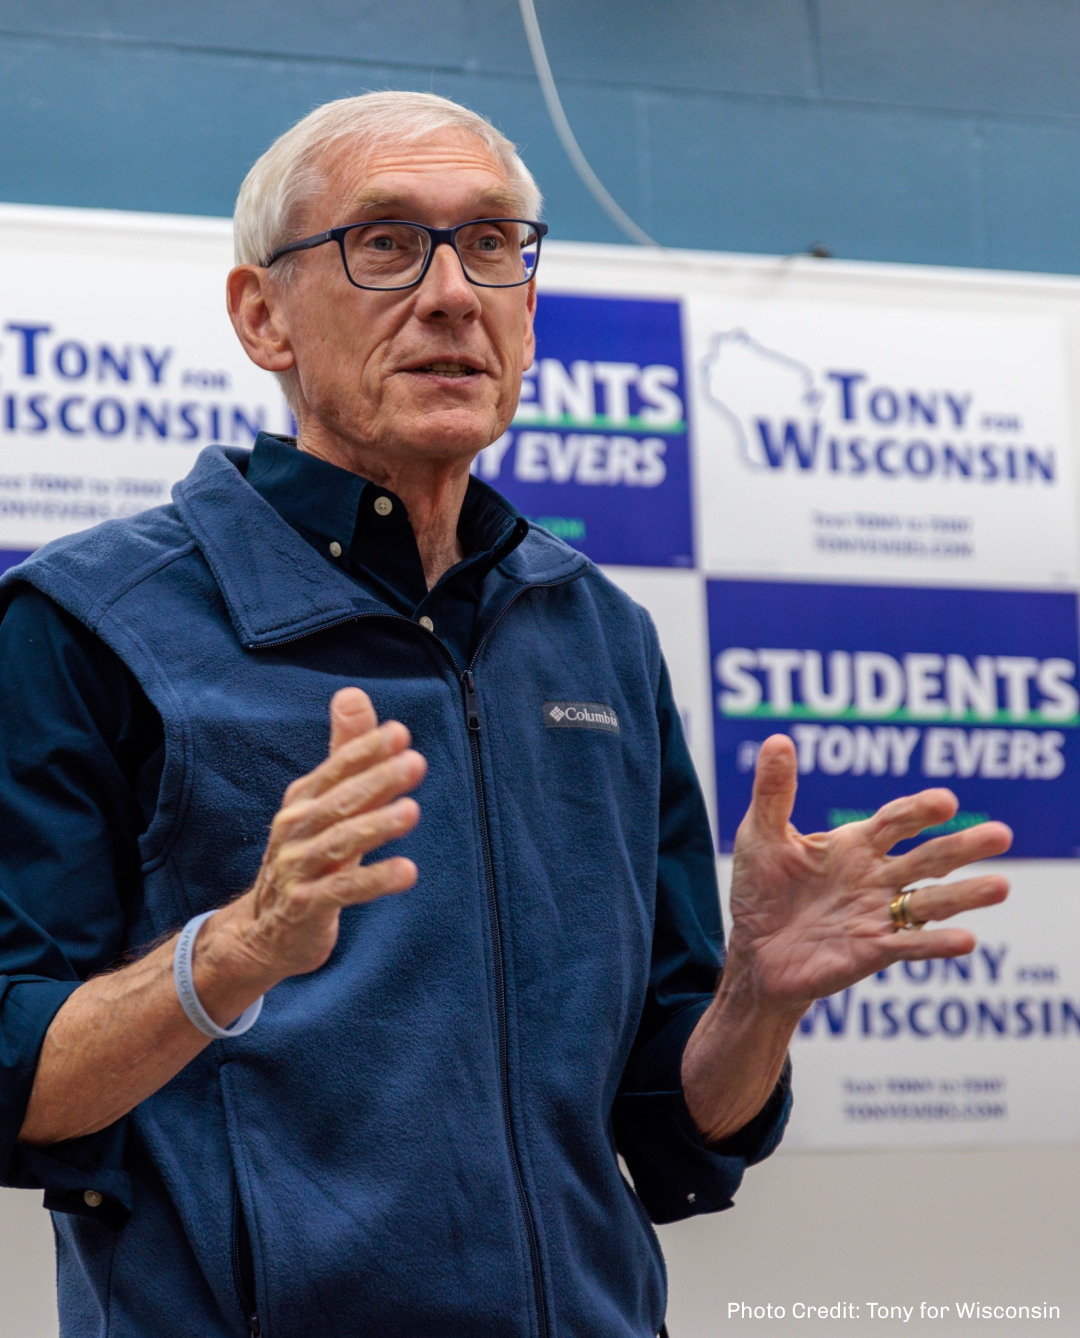 Gov. Tony Evers photographed speaking in front of campaign signs.